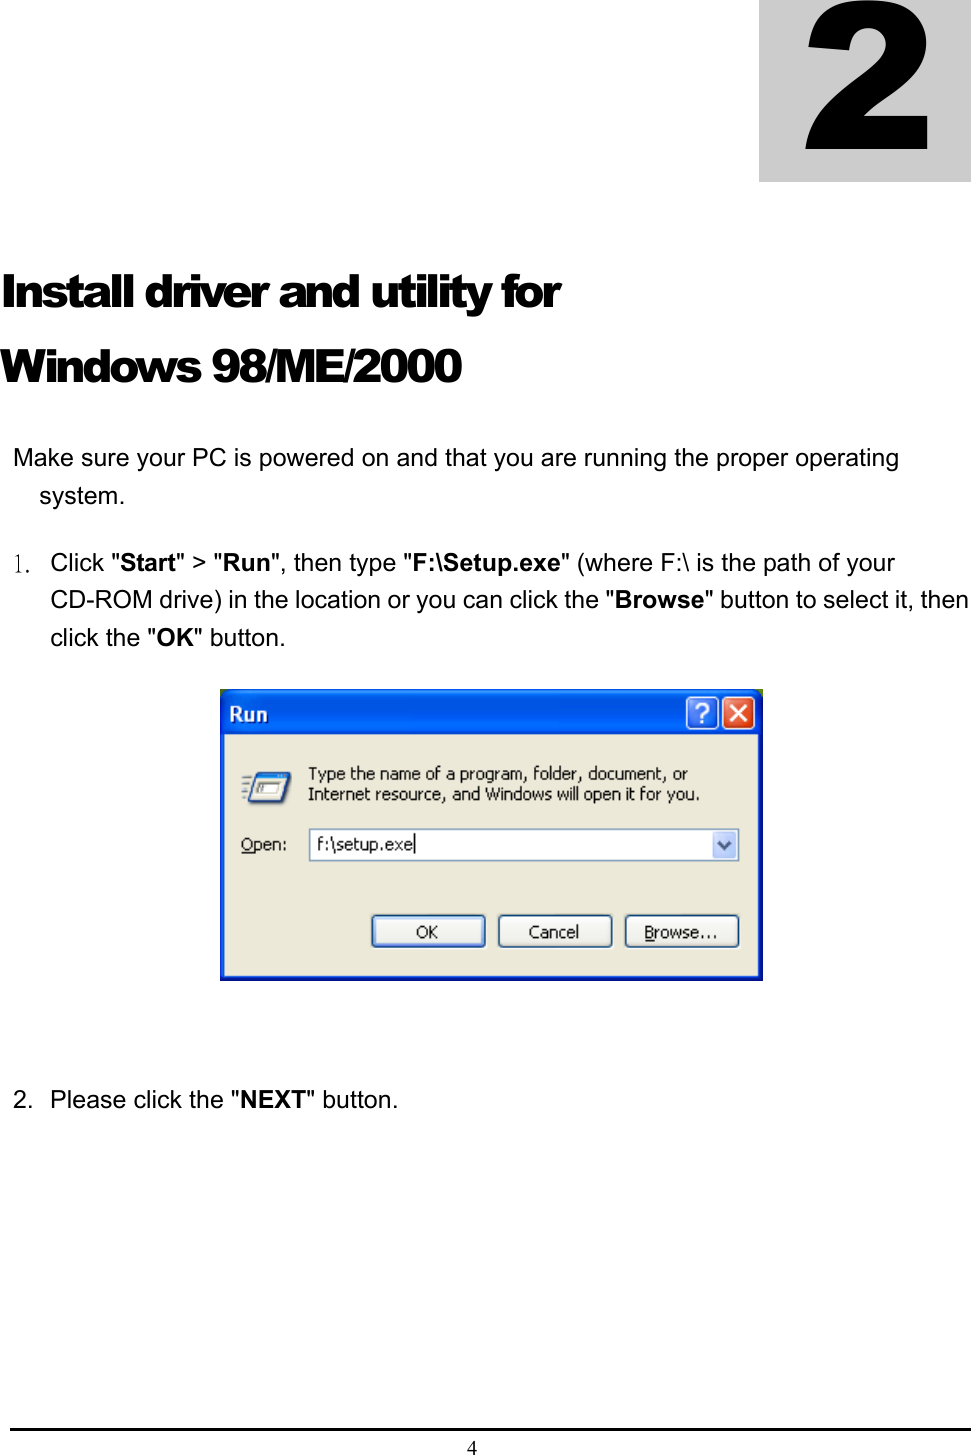  4  Install driver and utility for Windows 98/ME/2000 Make sure your PC is powered on and that you are running the proper operating system. 1. Click &quot;Start&quot; &gt; &quot;Run&quot;, then type &quot;F:\Setup.exe&quot; (where F:\ is the path of your CD-ROM drive) in the location or you can click the &quot;Browse&quot; button to select it, then click the &quot;OK&quot; button.   2.  Please click the &quot;NEXT&quot; button.  2 